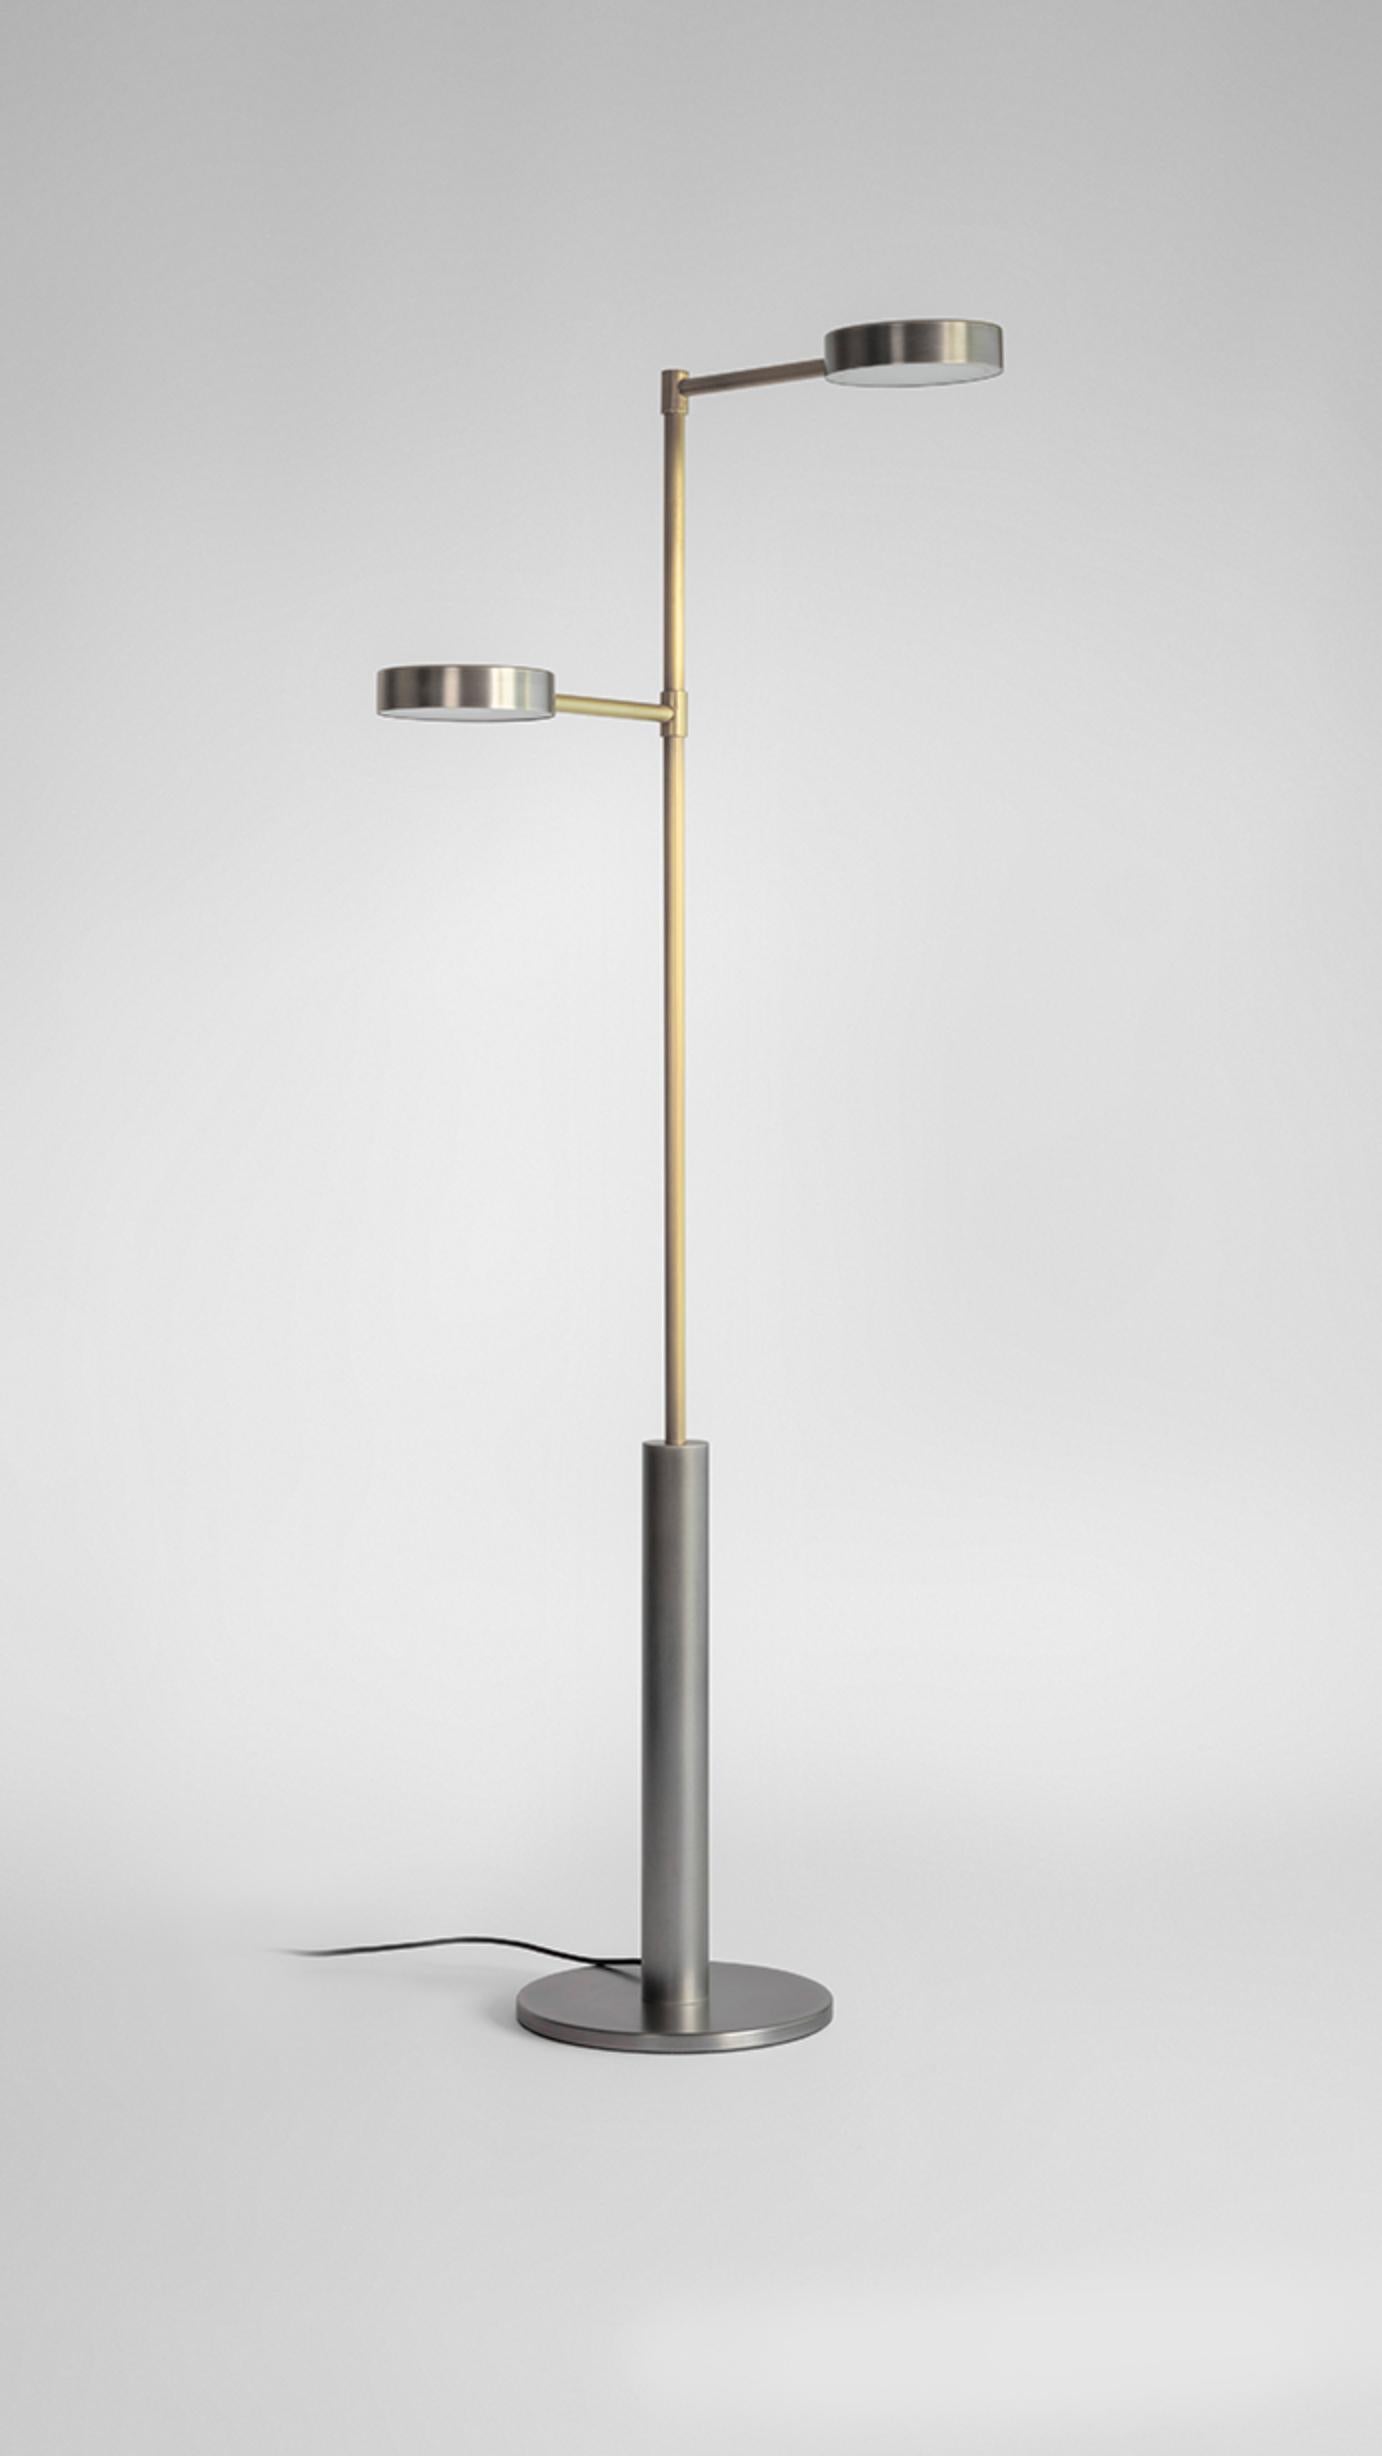 Brass Two Cylinders Floor Lamp by Square in Circle
Dimensions: H 145 x W 48 x D 28 cm
Materials: Brushed brass finish, white painted metal shades, brushed brass inner finish

This floor lamp is crafted from a brushed grey cylindrical base. It's two